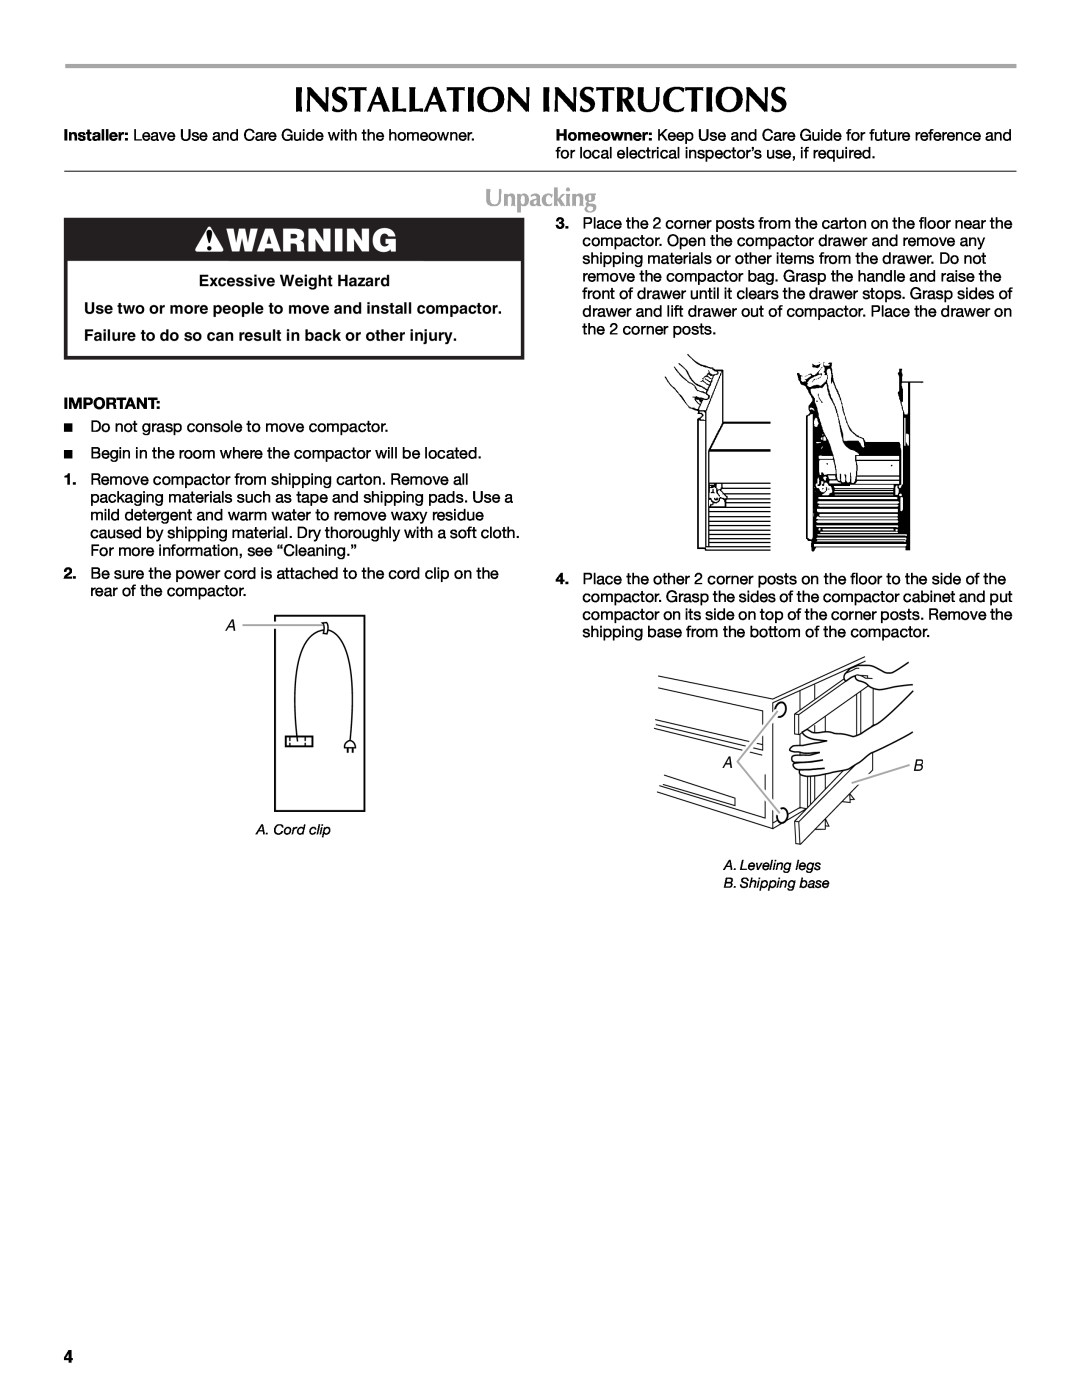 Maytag W10190314A, MTUC7000AWS manual Installation Instructions, Unpacking, Excessive Weight Hazard 